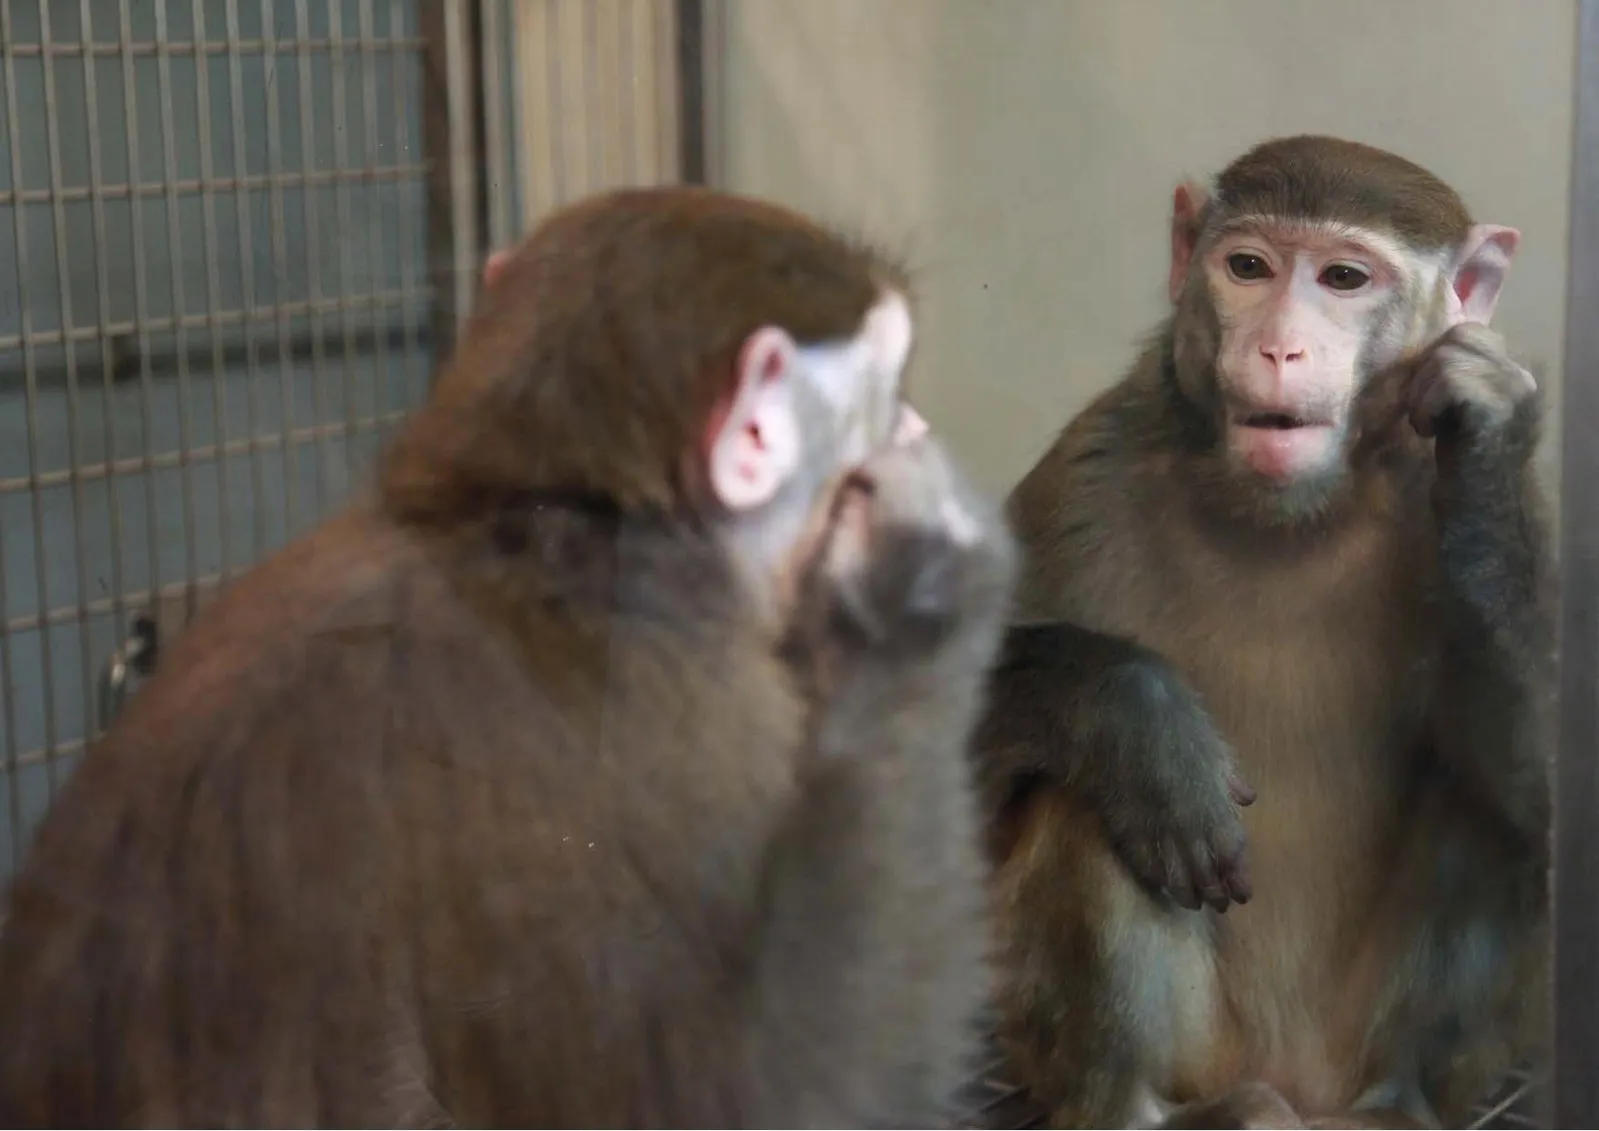 Princeton study suggests that monkeys, like humans, may have 'self